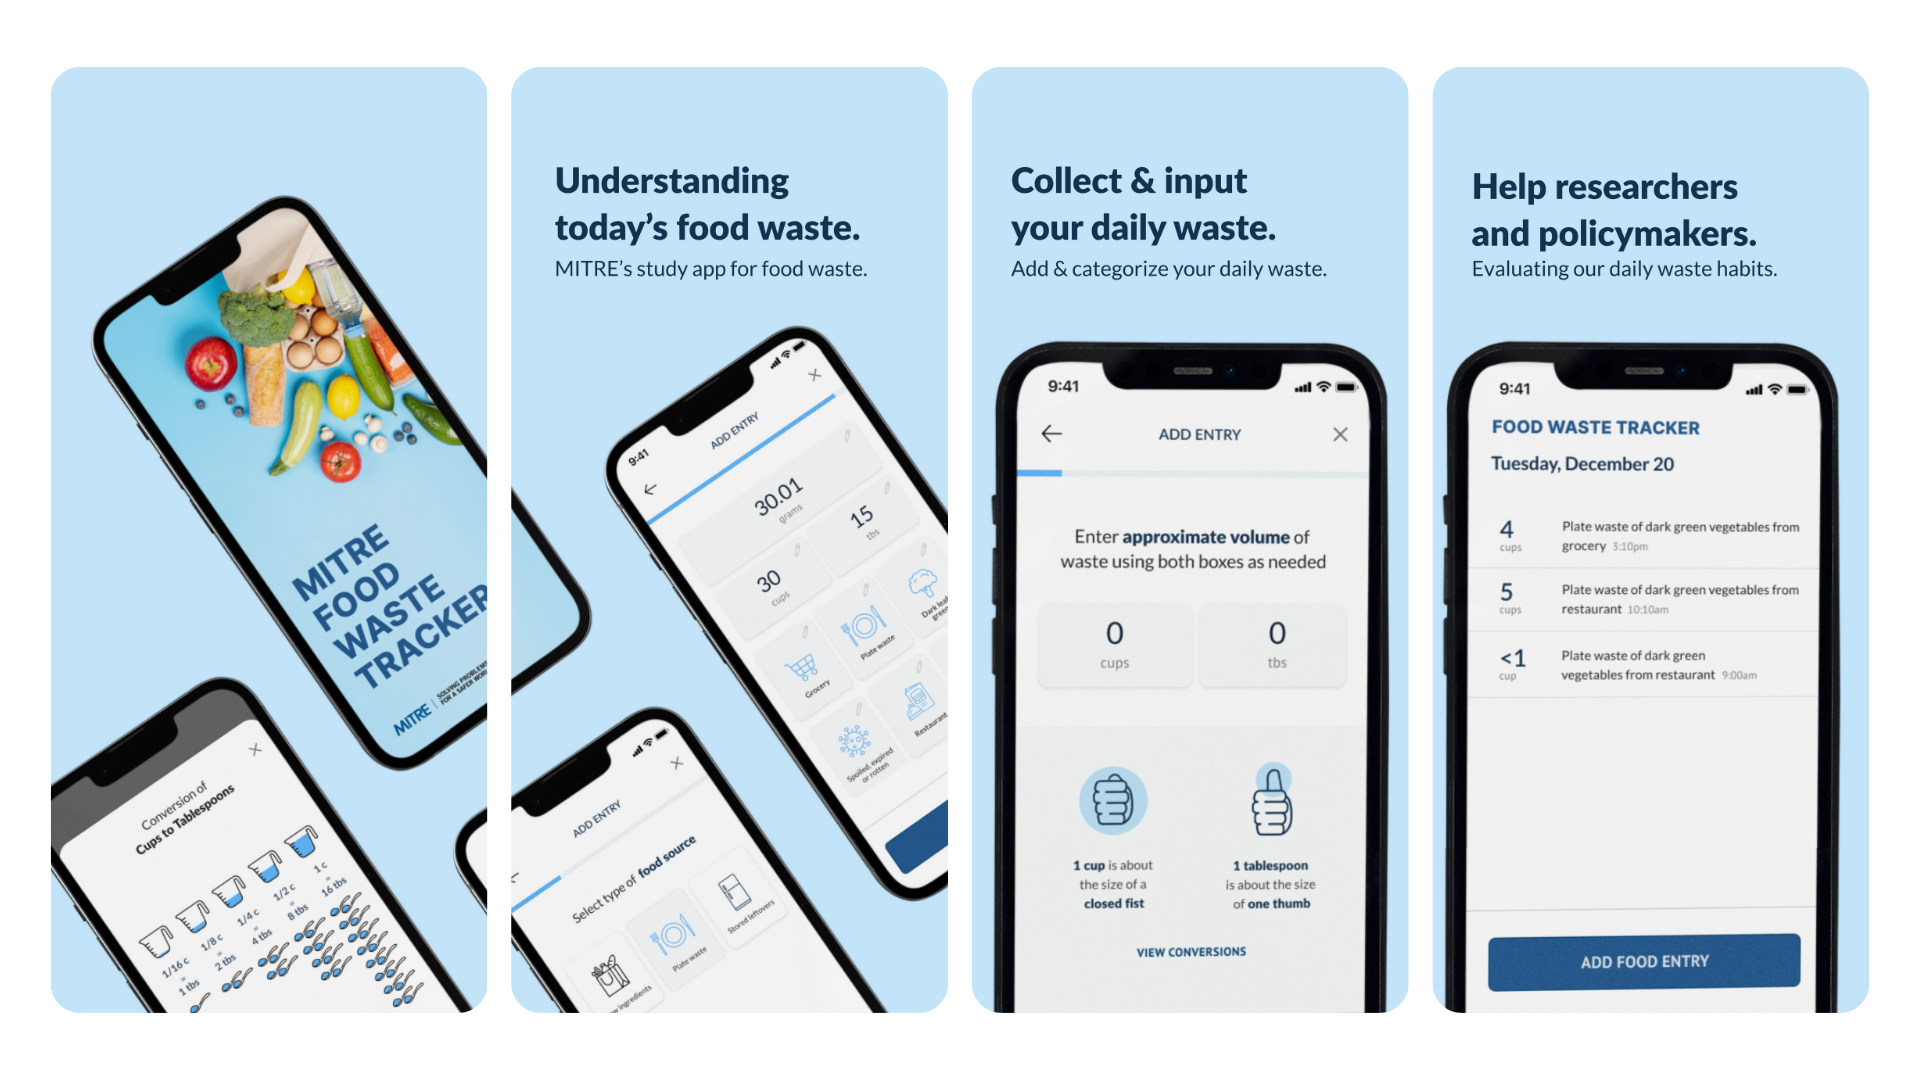 Screen captures from the MITRE Food Waste Tracker app